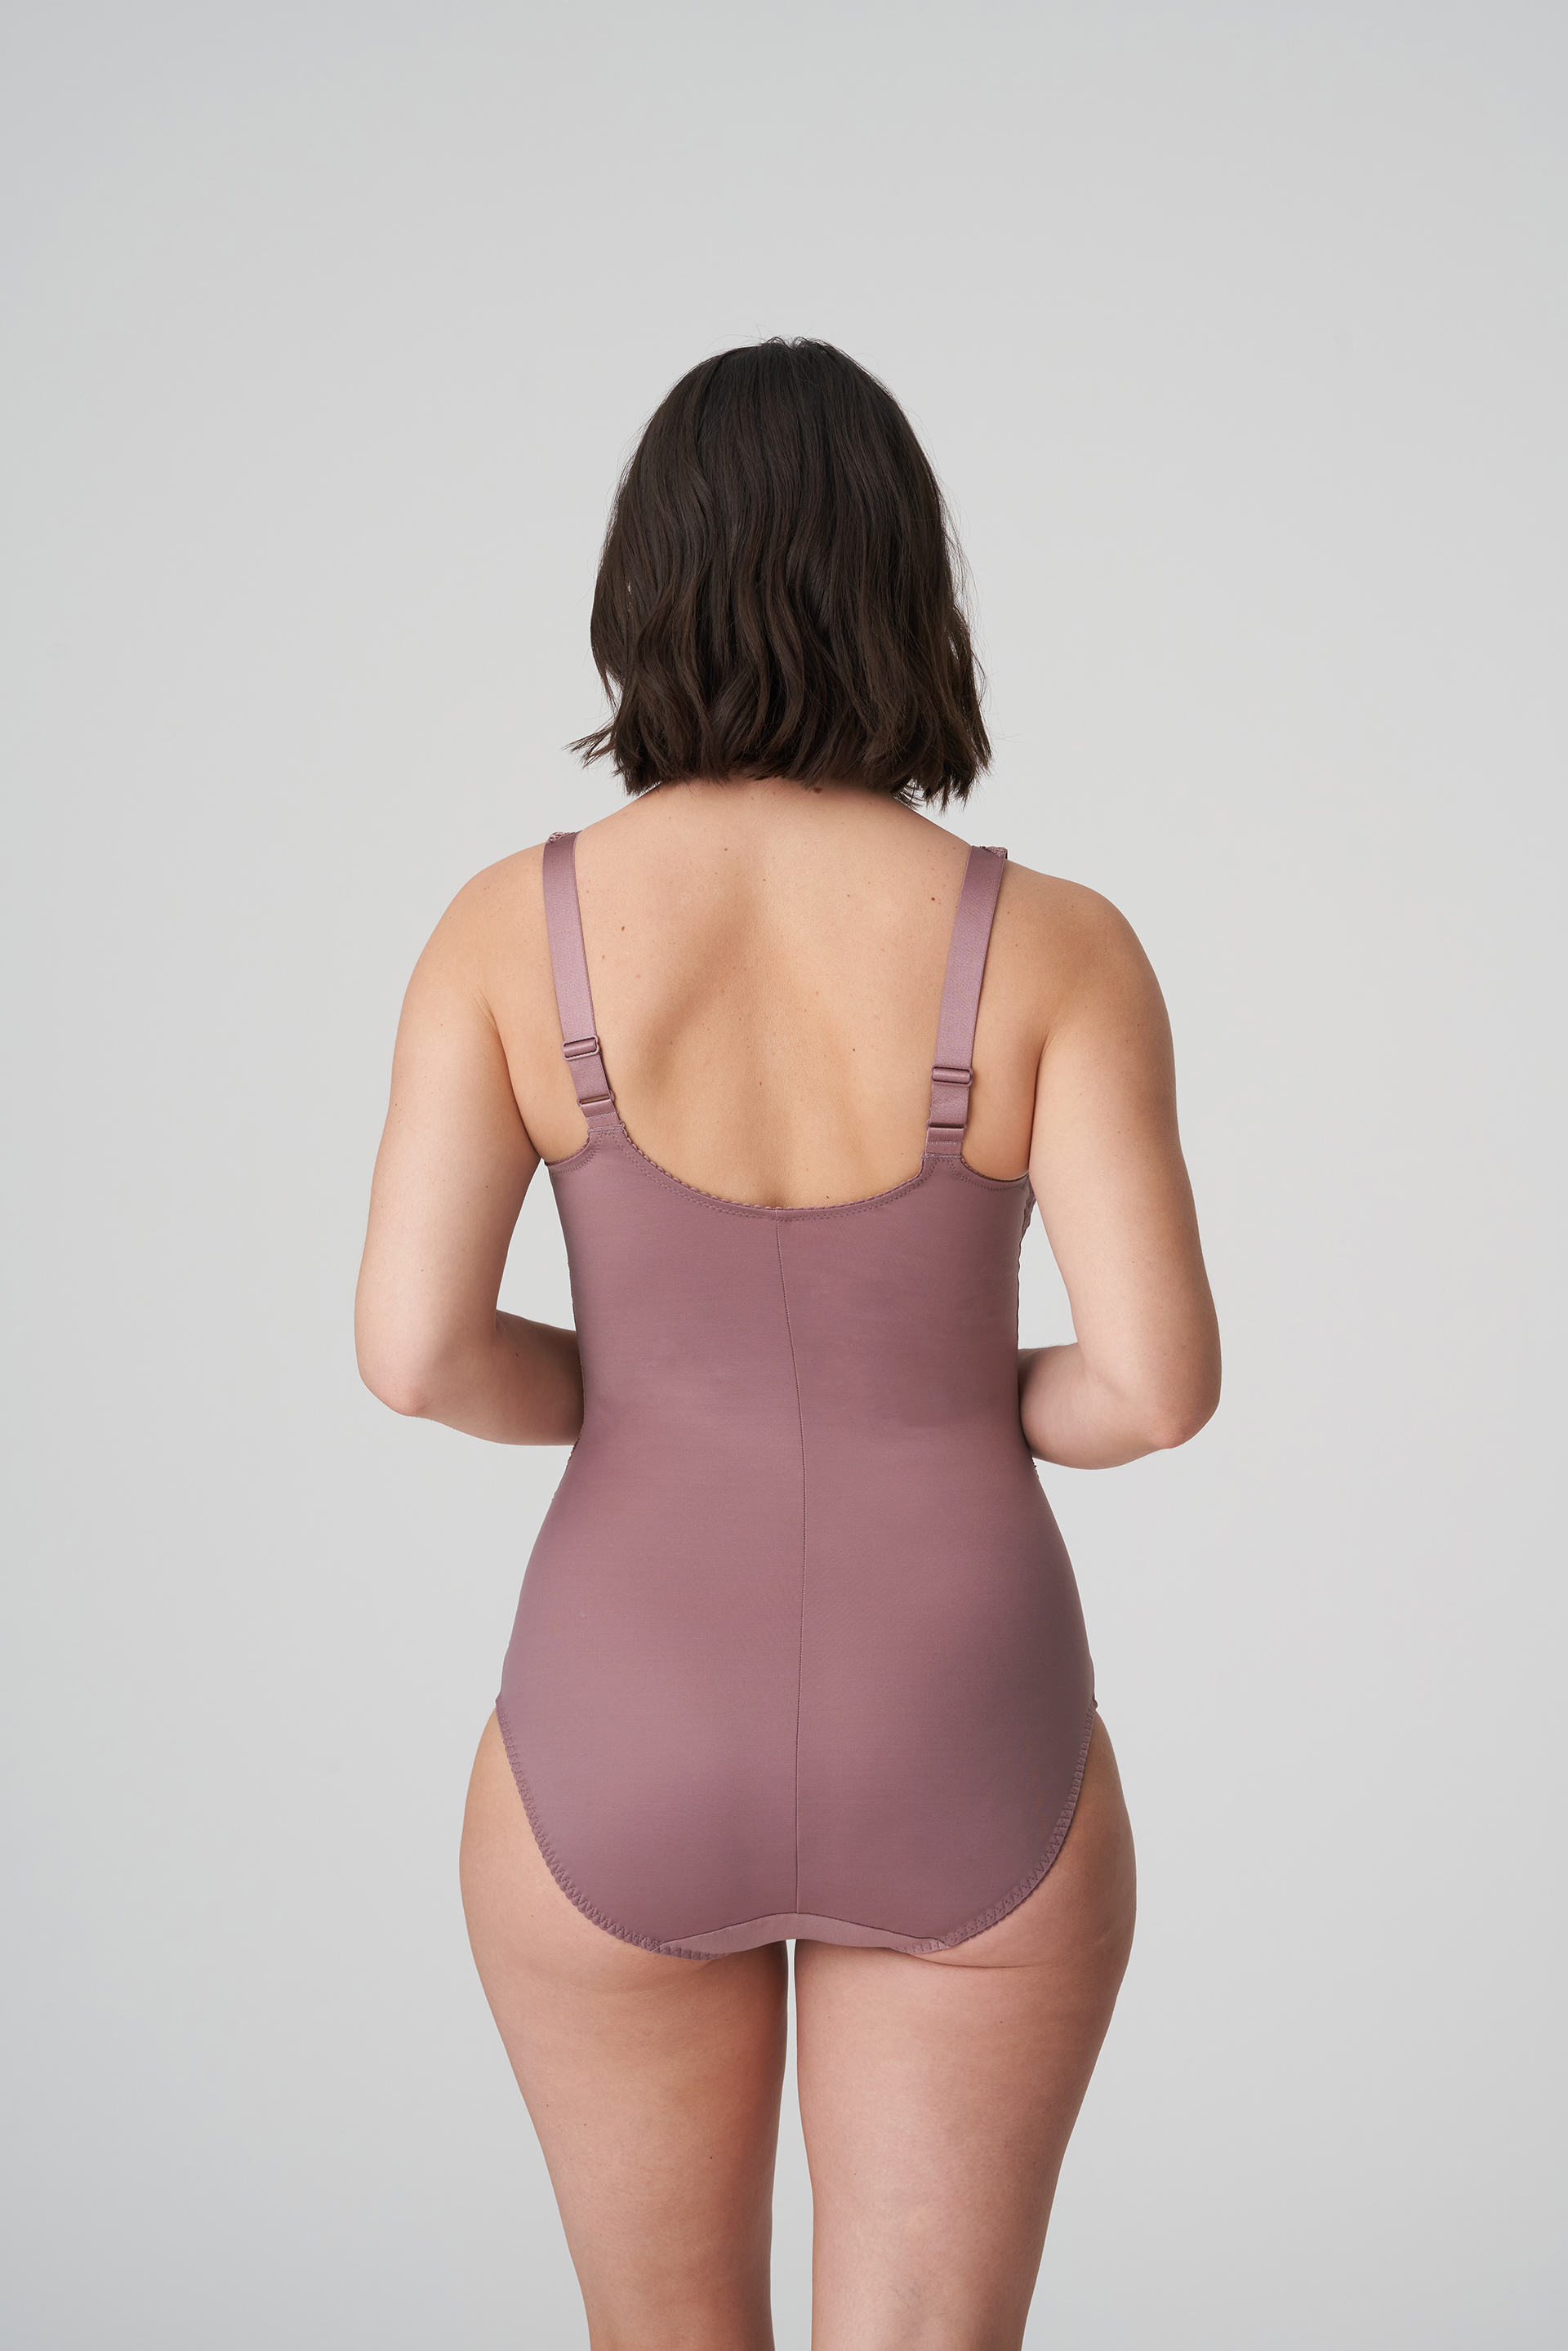 PrimaDonna MADISON Satin Taupe full cup body